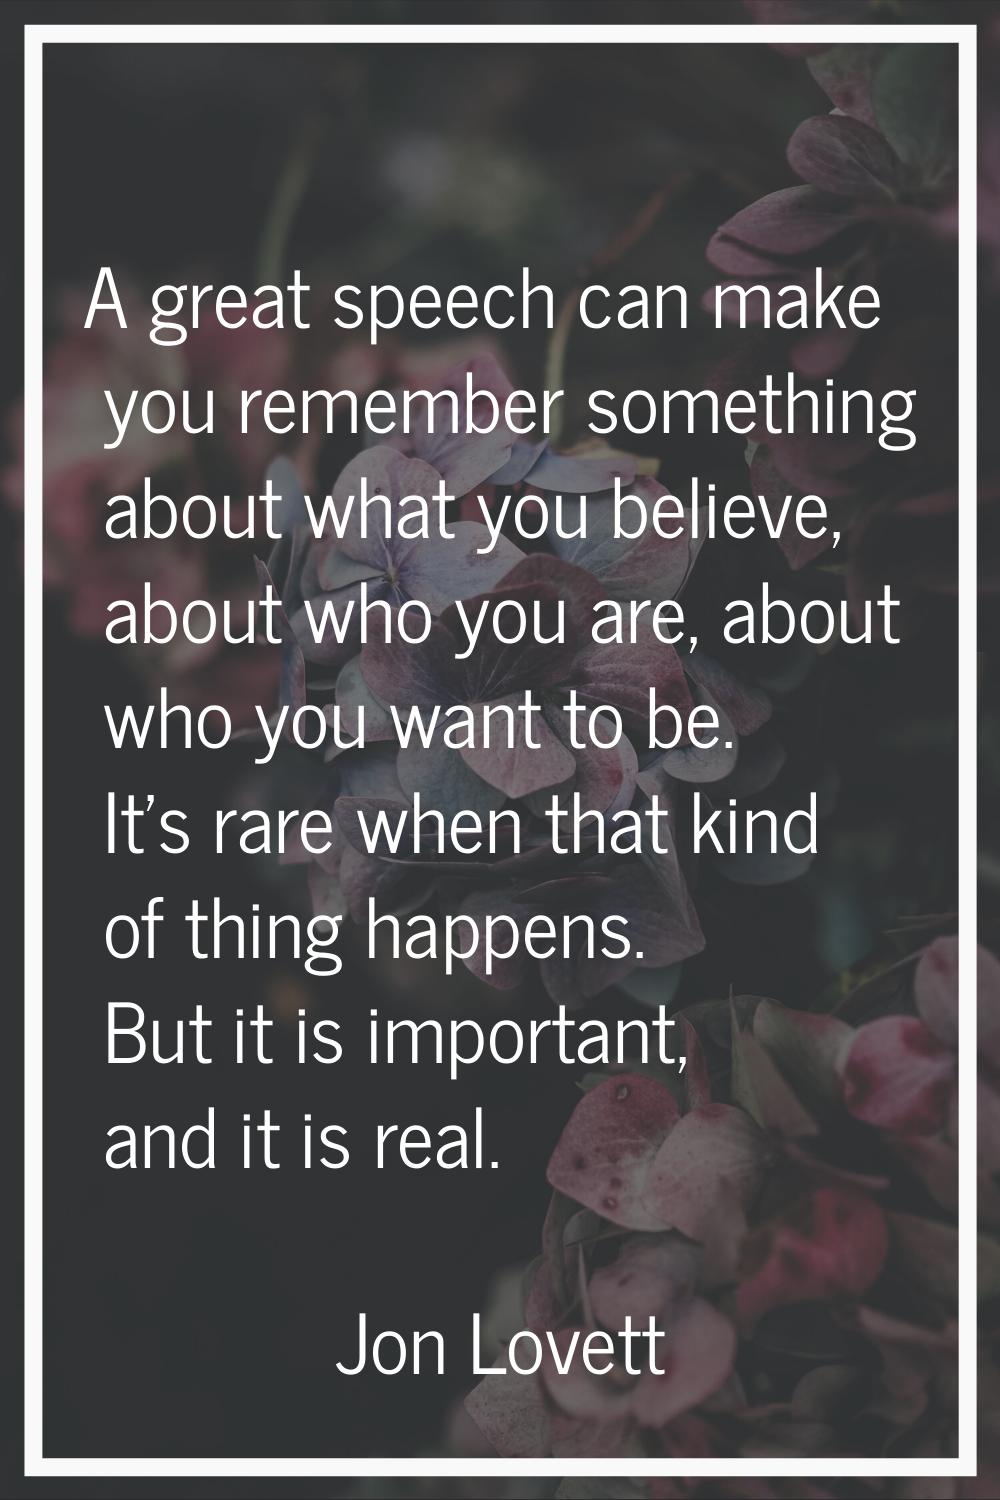 A great speech can make you remember something about what you believe, about who you are, about who